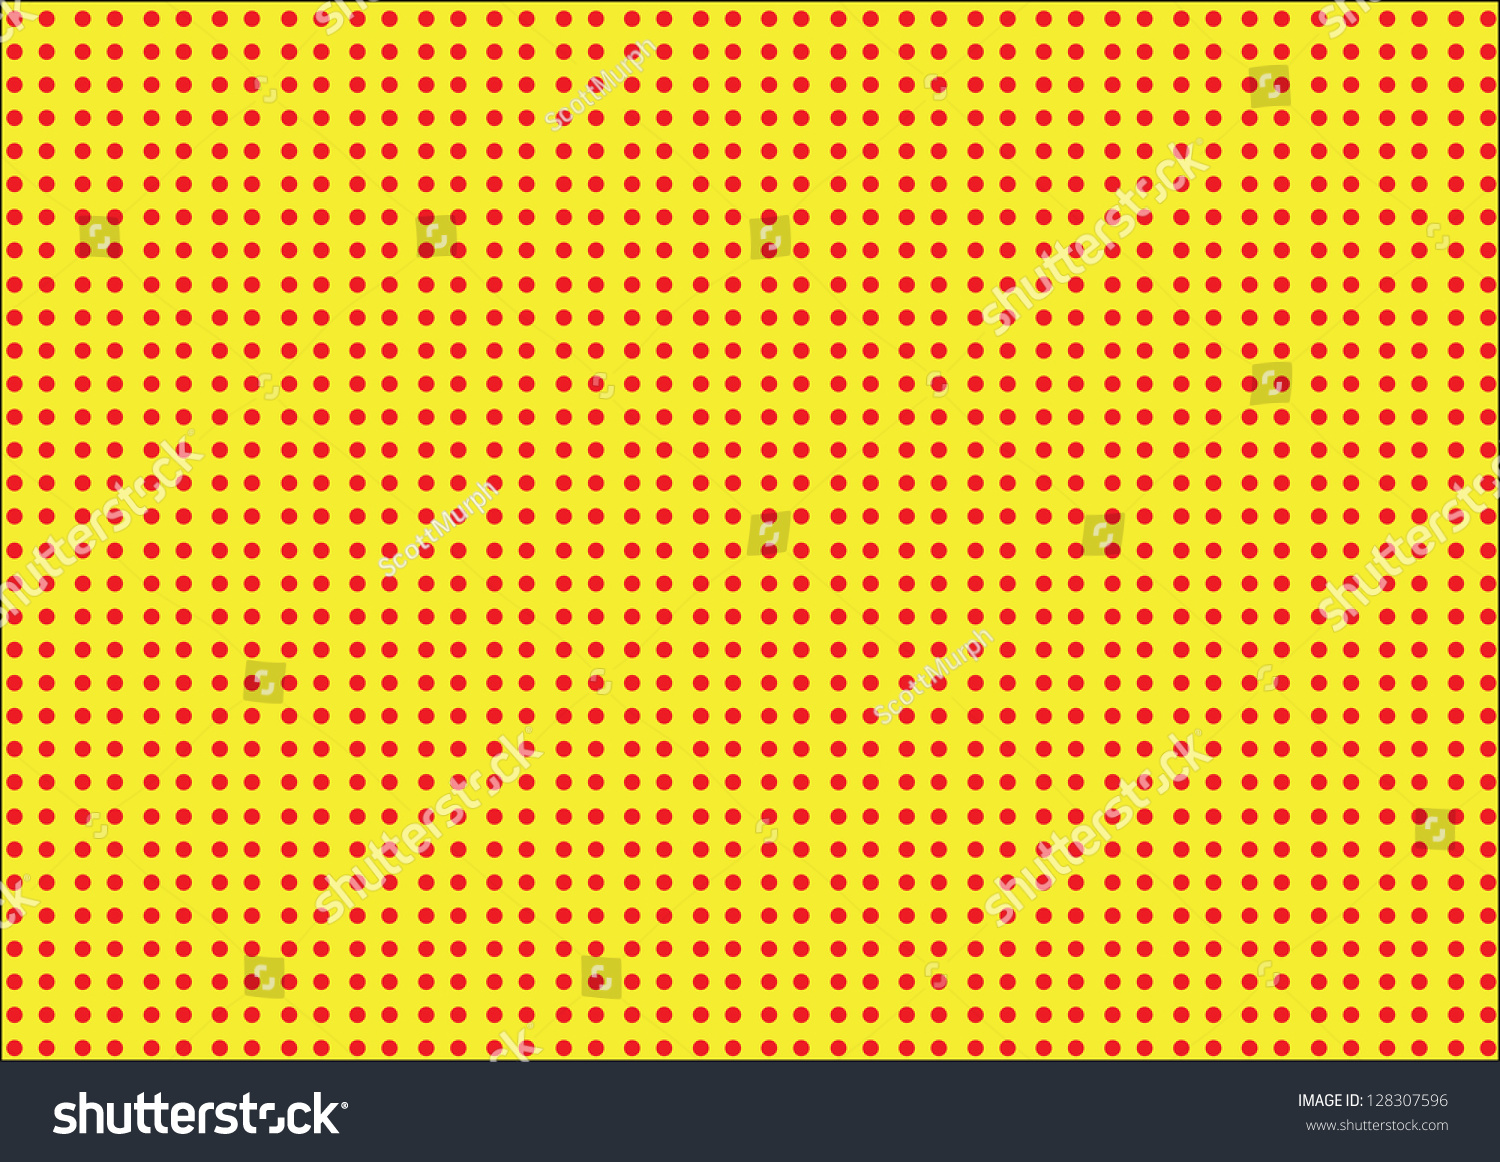 Red Dots On A Yellow Background Stock Photo 128307596 : Shutterstock